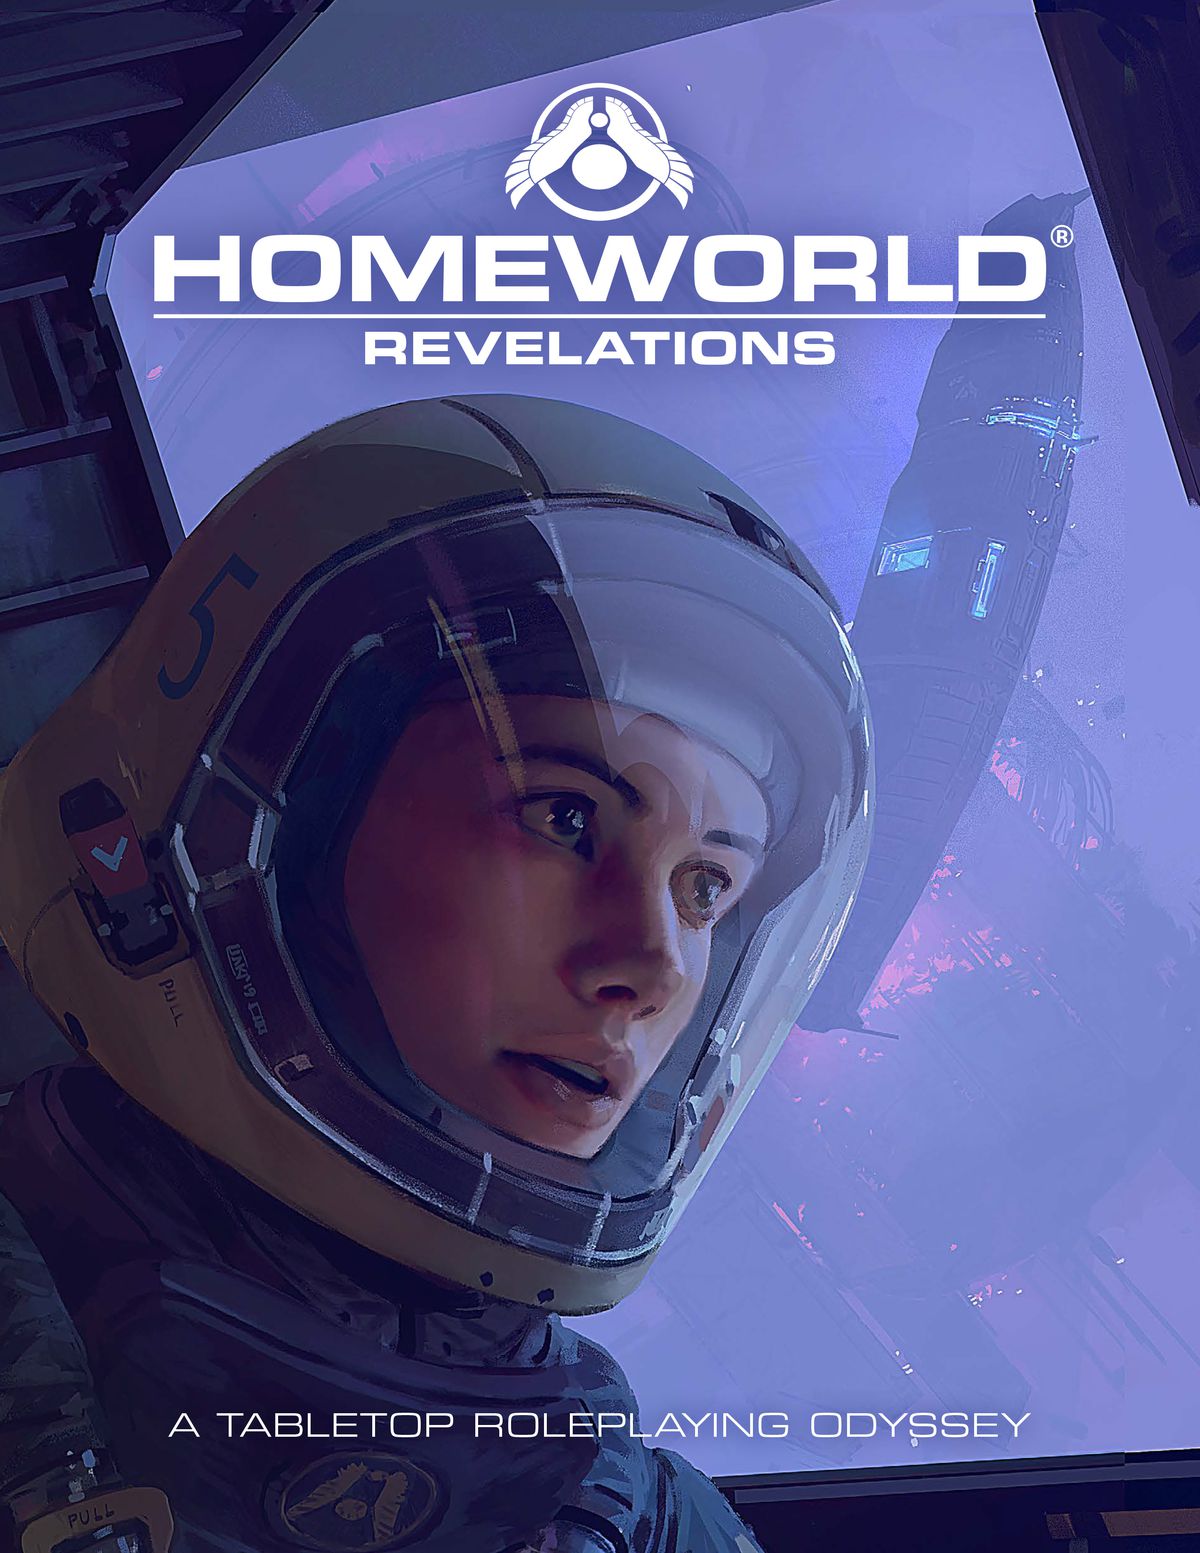 Cover image and logo for Homeworld: Revelations core rulesebook.